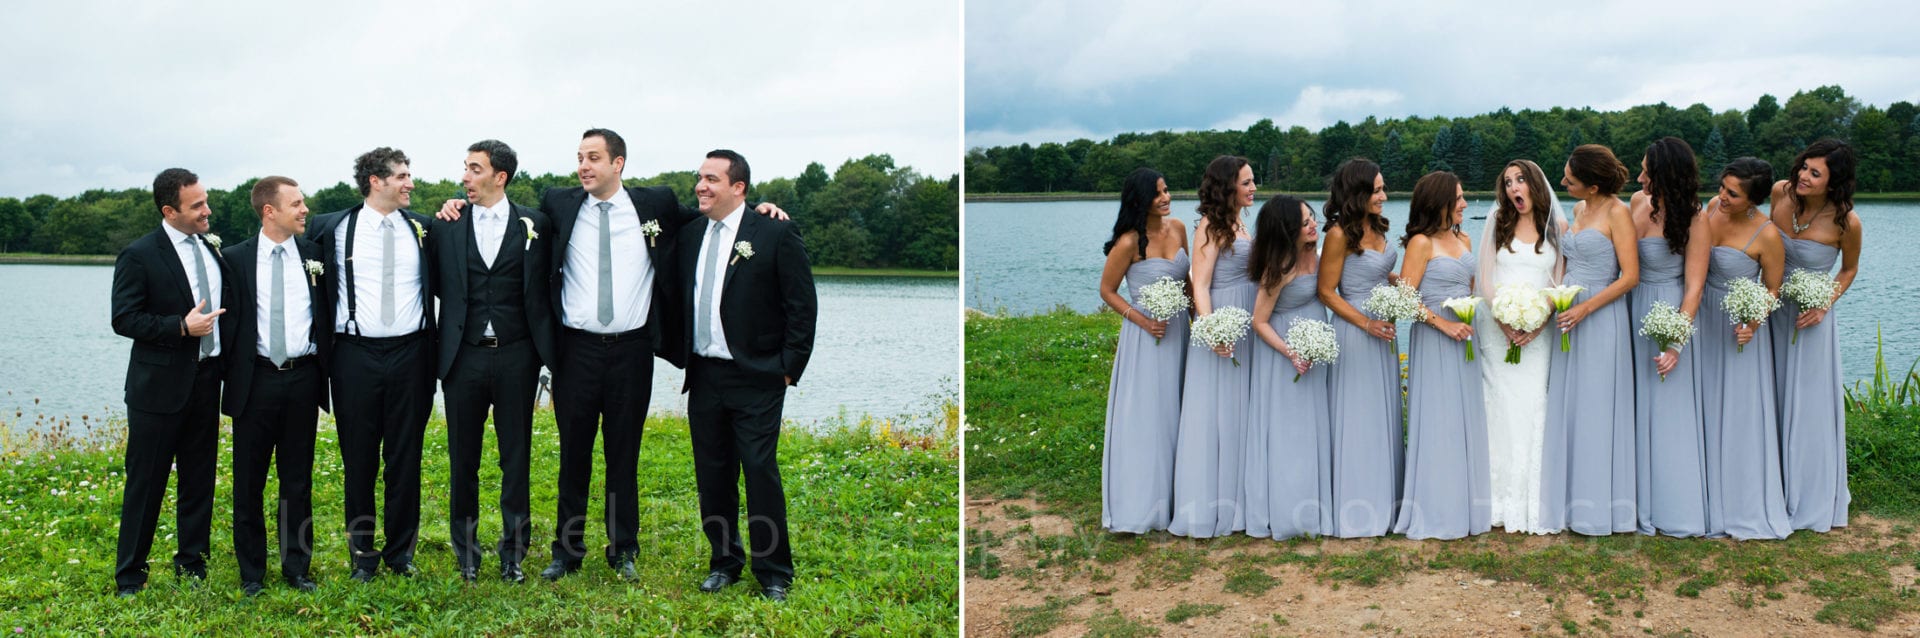 Groomsmen wearing black suits and laughing next to a photo of a bride and bridesmaids standing together laughing in front of a lake.